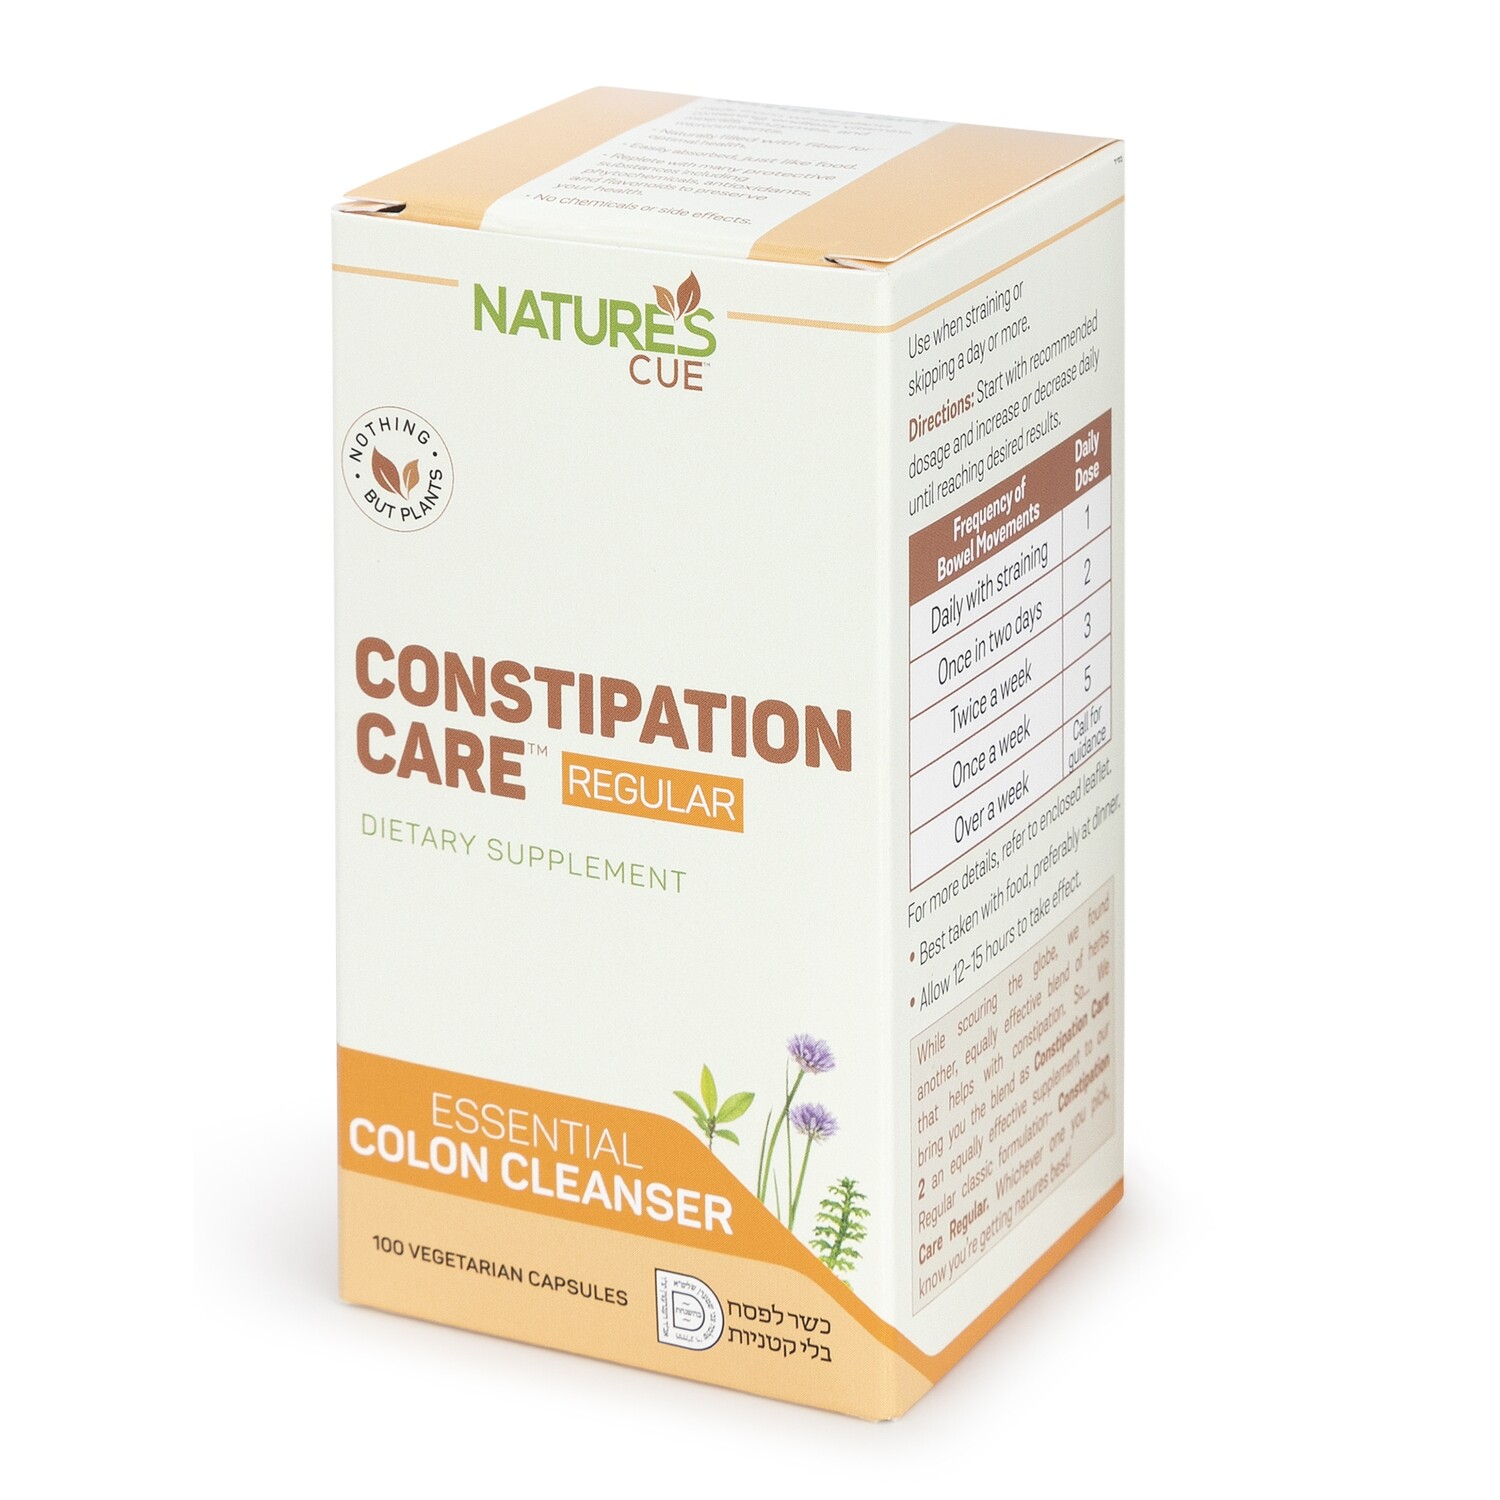 Natures Cue, Constipation Care Regular - 250 Vegetarian Capsules - Kosher for Passover